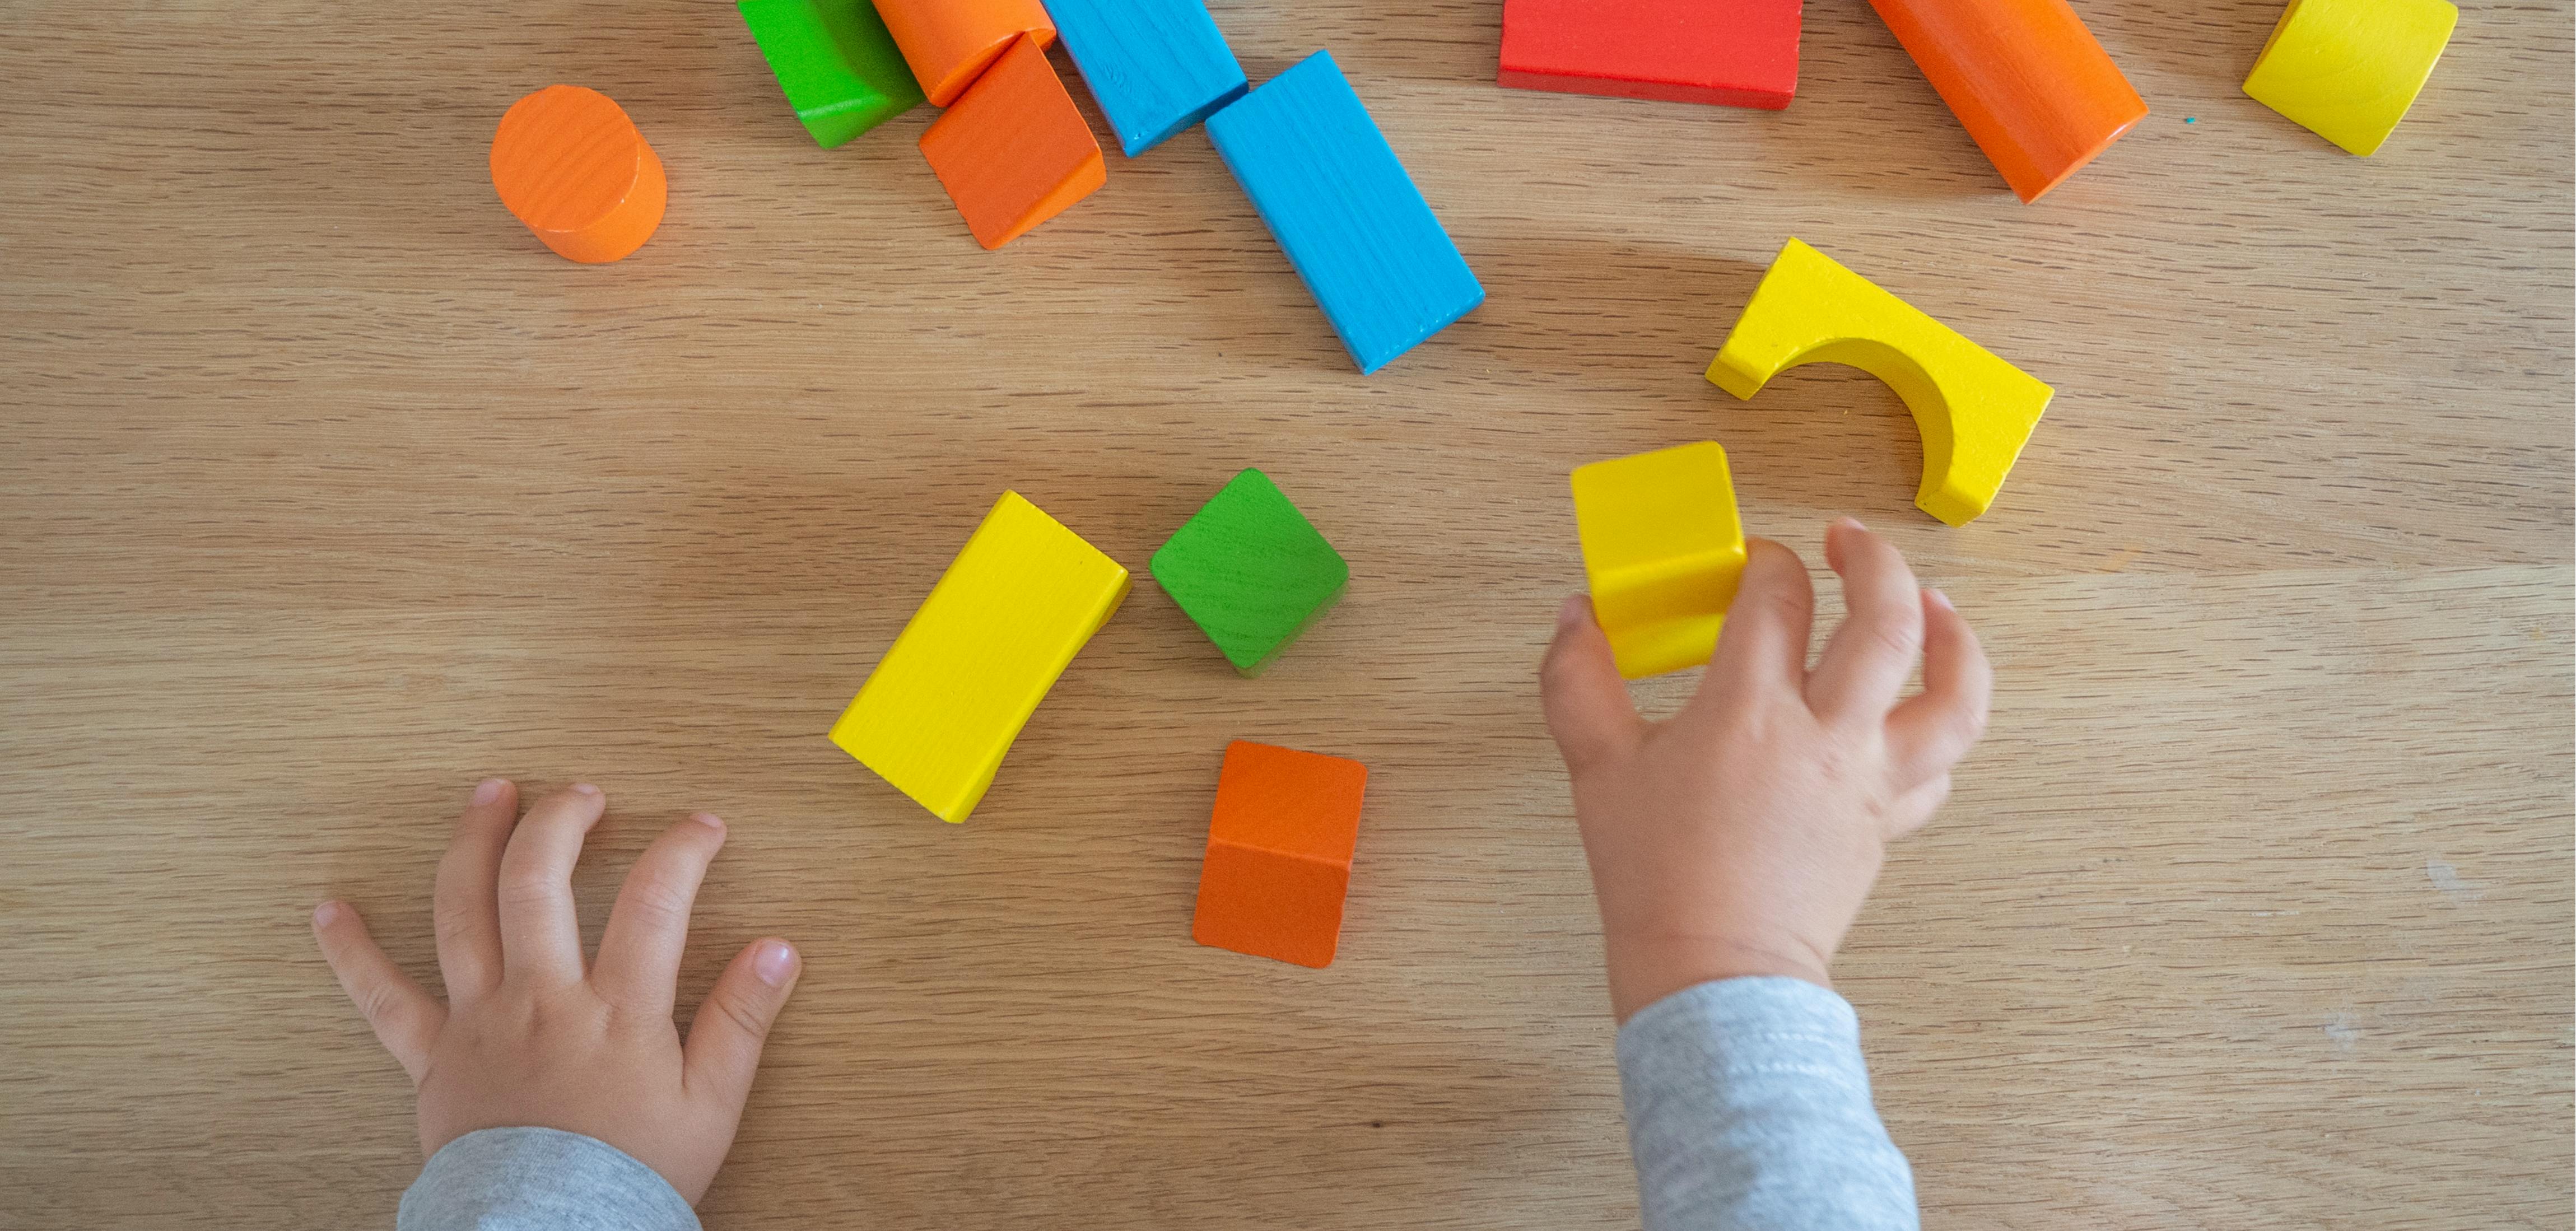 A toddler plays with coloured bricks on a wooden floor